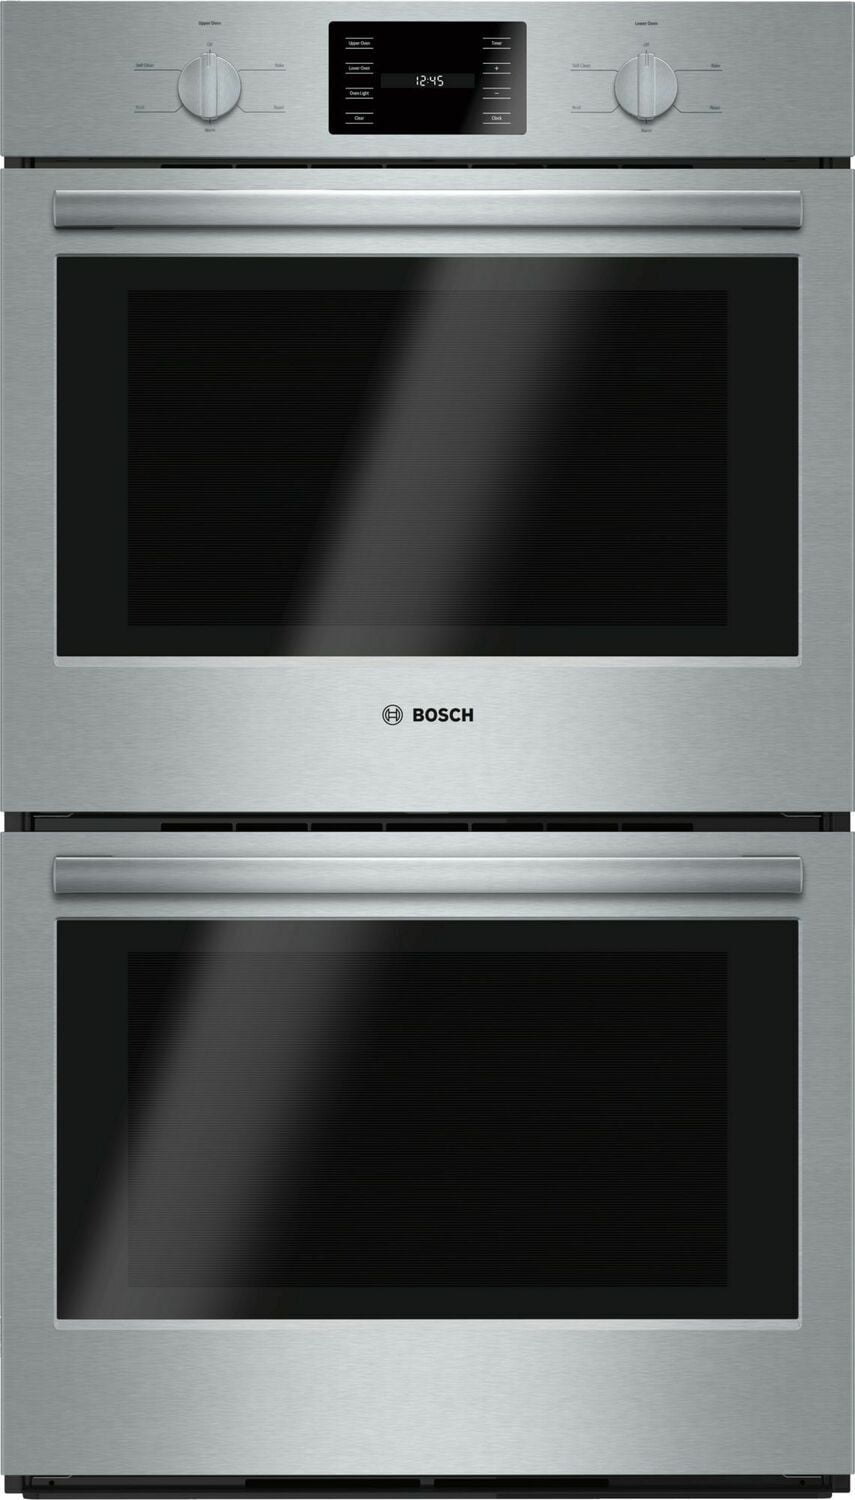 Bosch HBL5551UC 500 Series, 30", Double Wall Oven, Ss, Thermal/Thermal, Knob Control